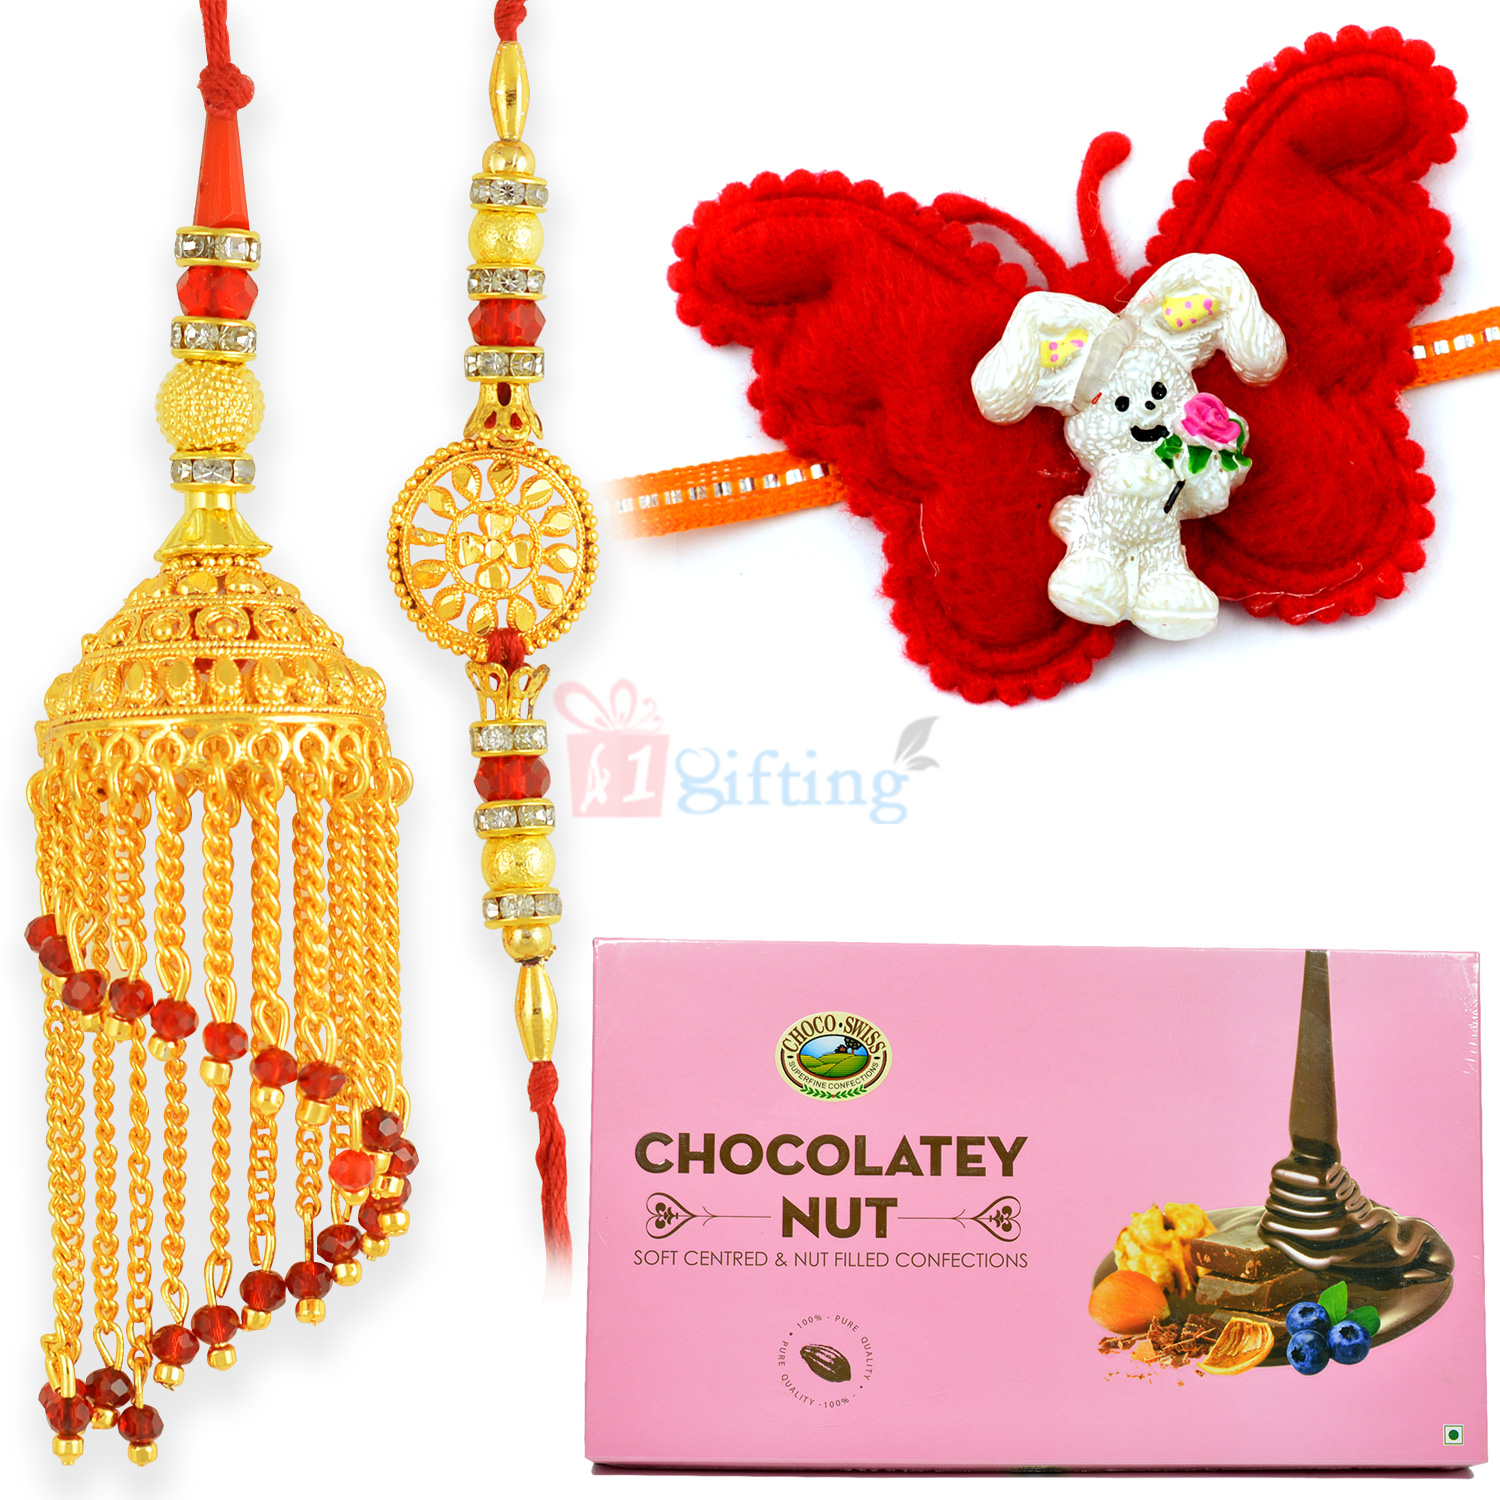 Chocolatey Nut with Golden Touch Pair and Kids Rakhi Hamper